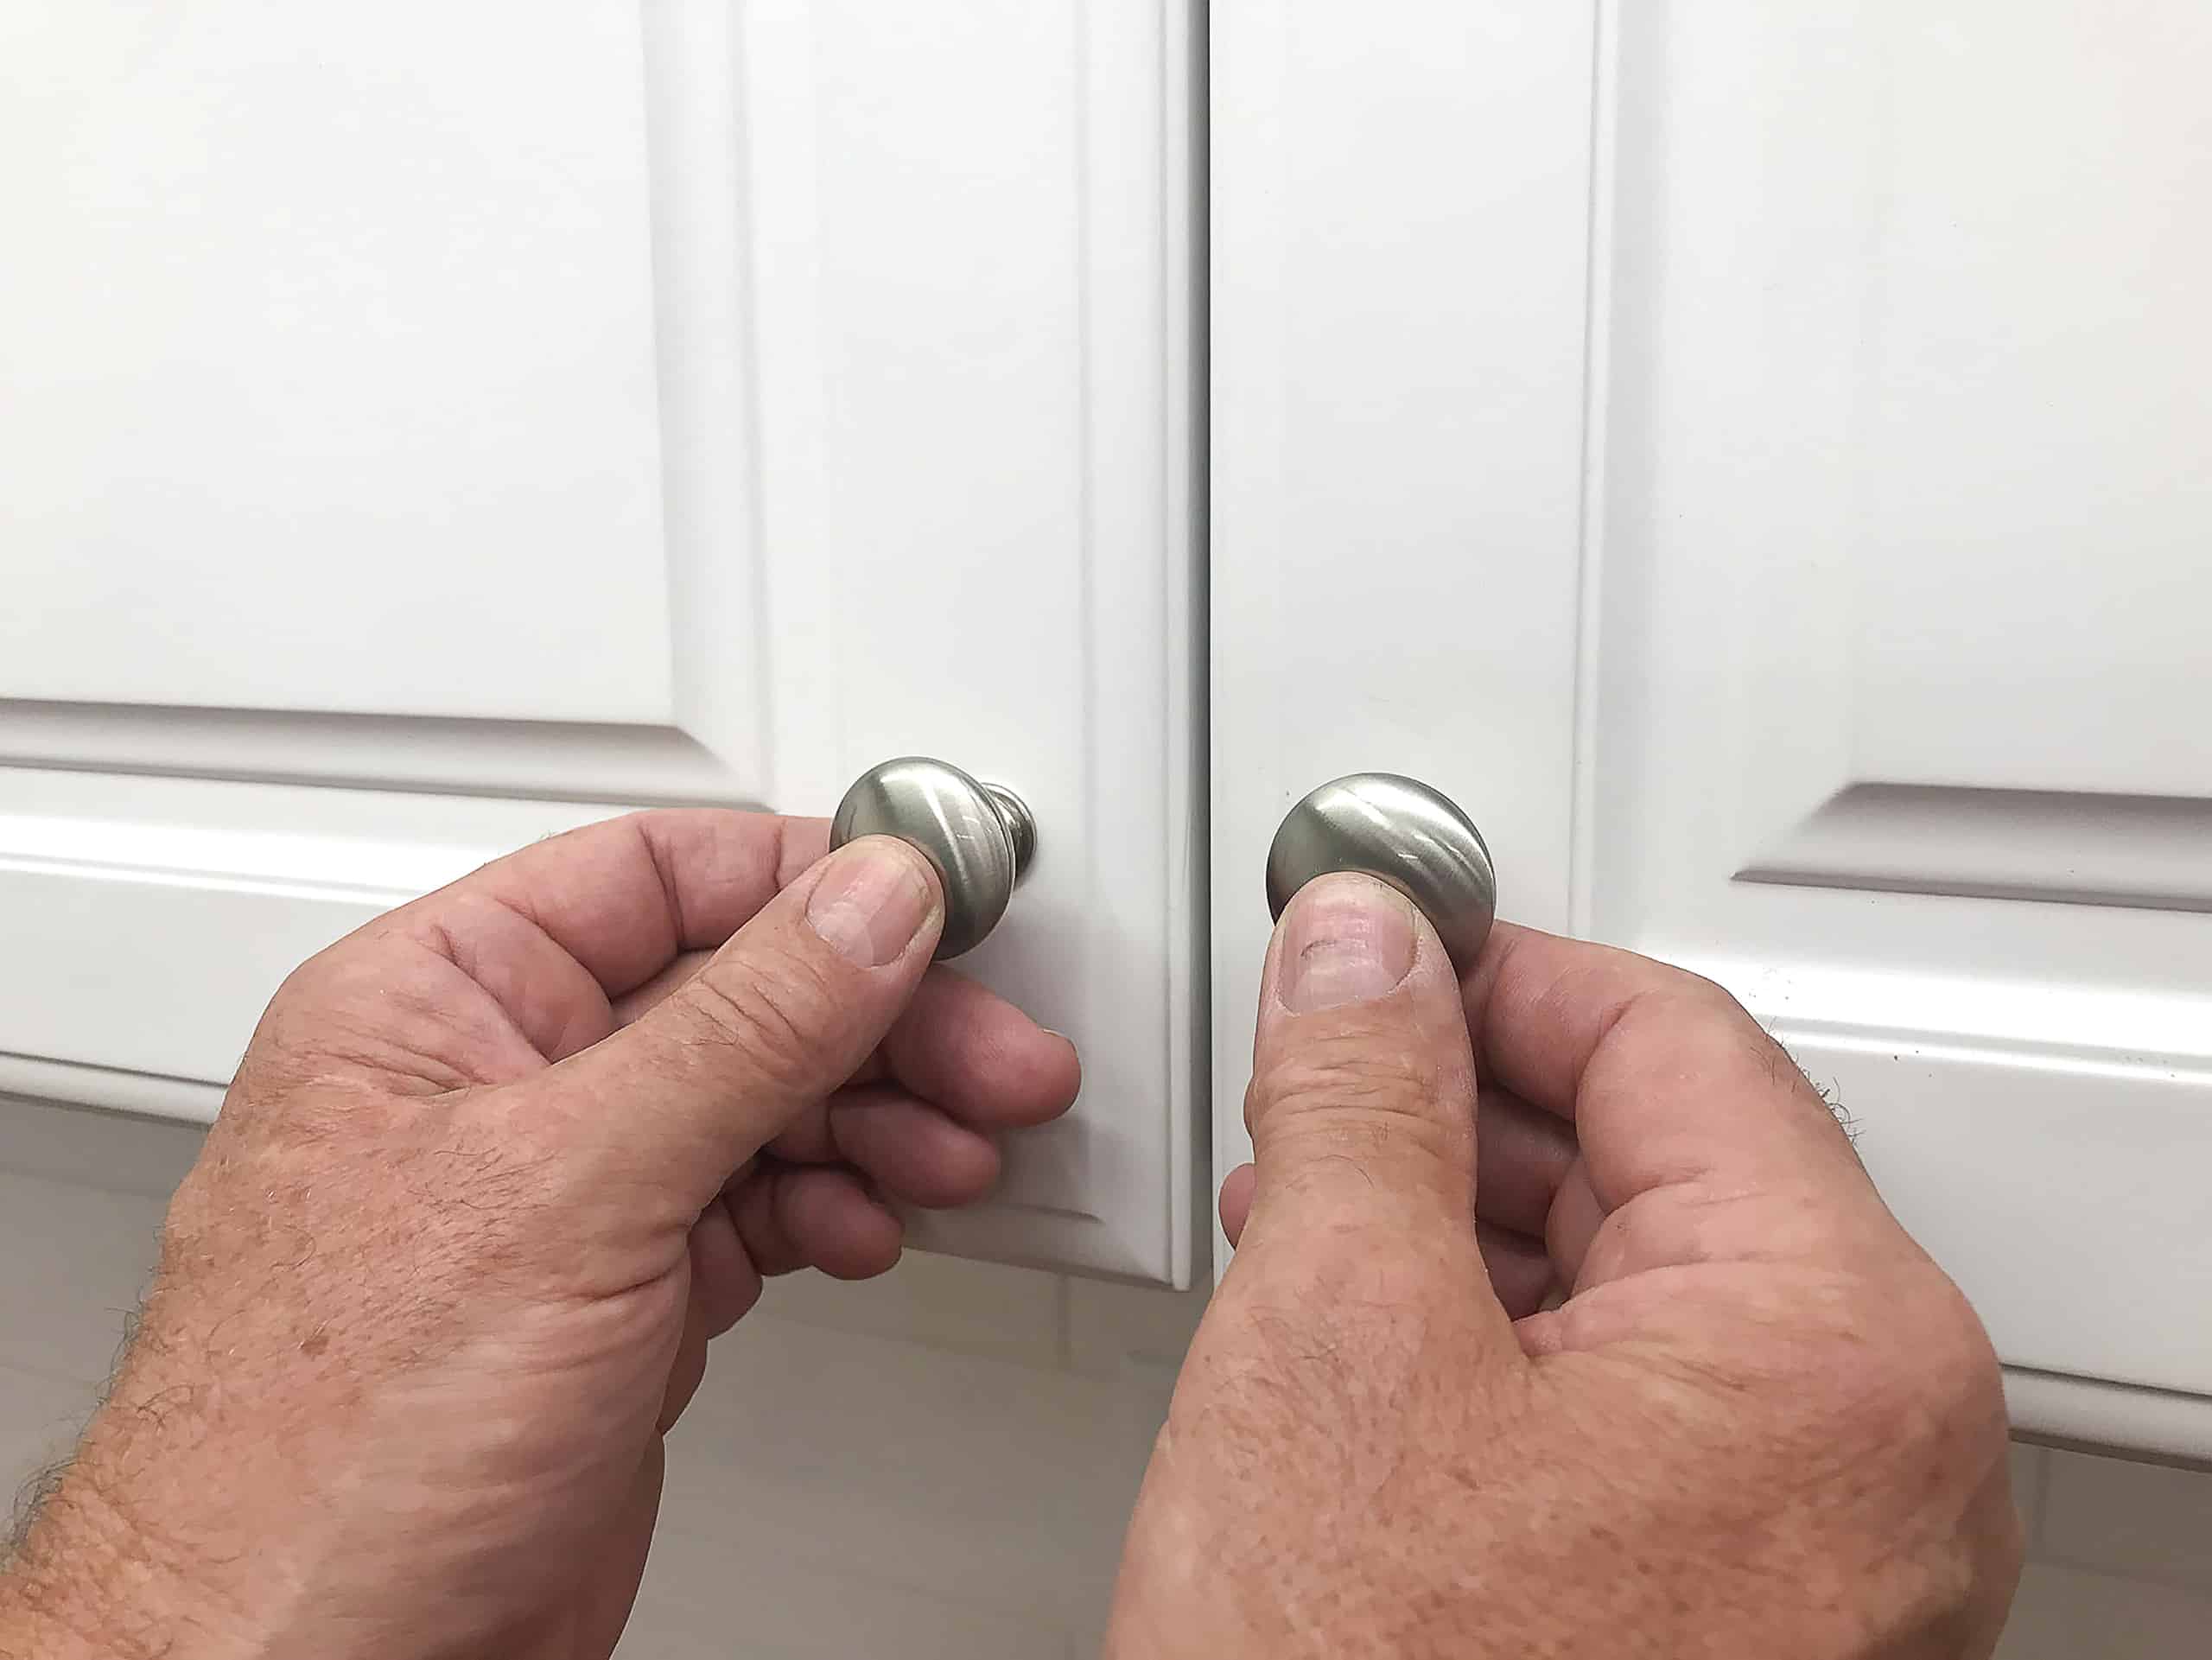 How To Install Knobs On Cabinet Doors True Position Tools